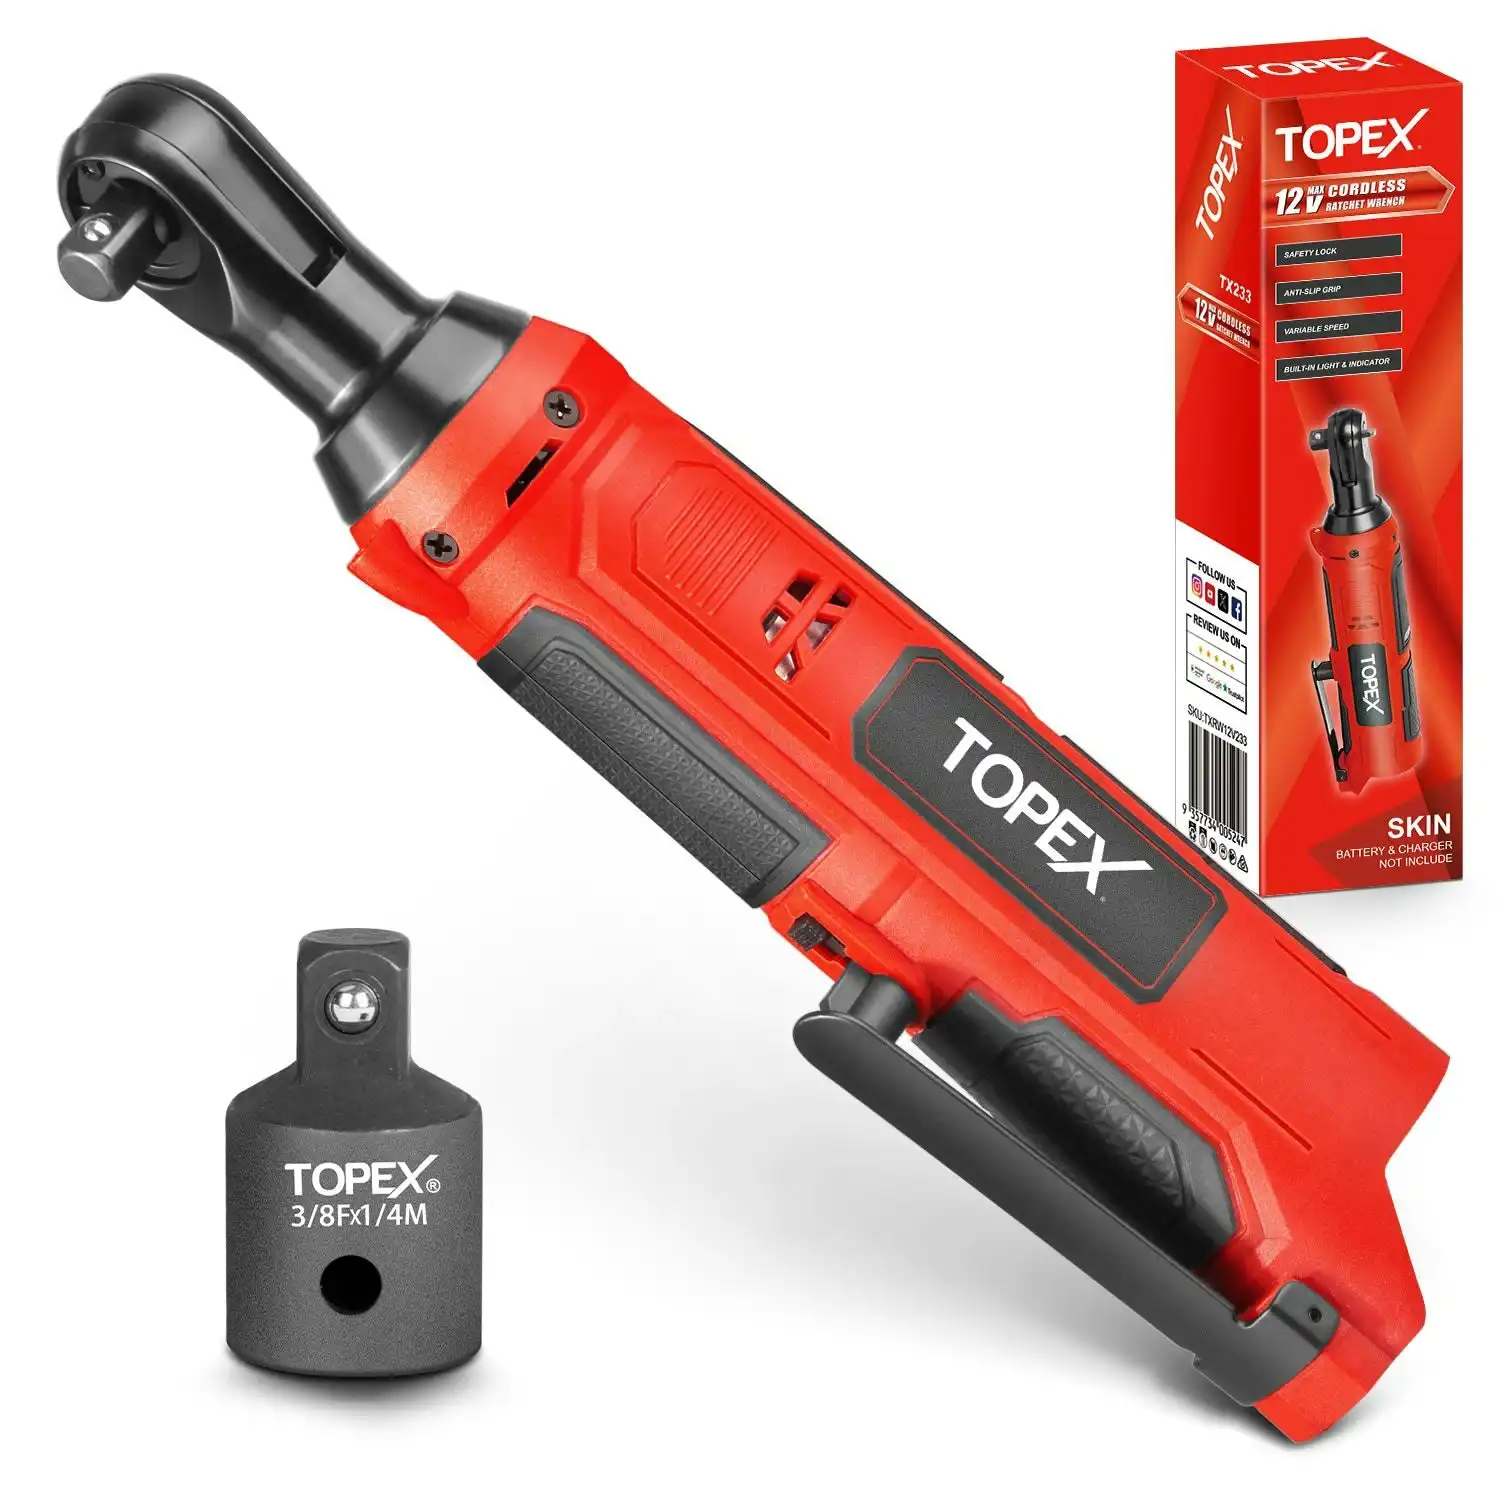 Topex 3/8" 12V Cordless Electric Ratchet Wrench 45NM 300RPM Variable Speed & LED Light Skin Only without Battery